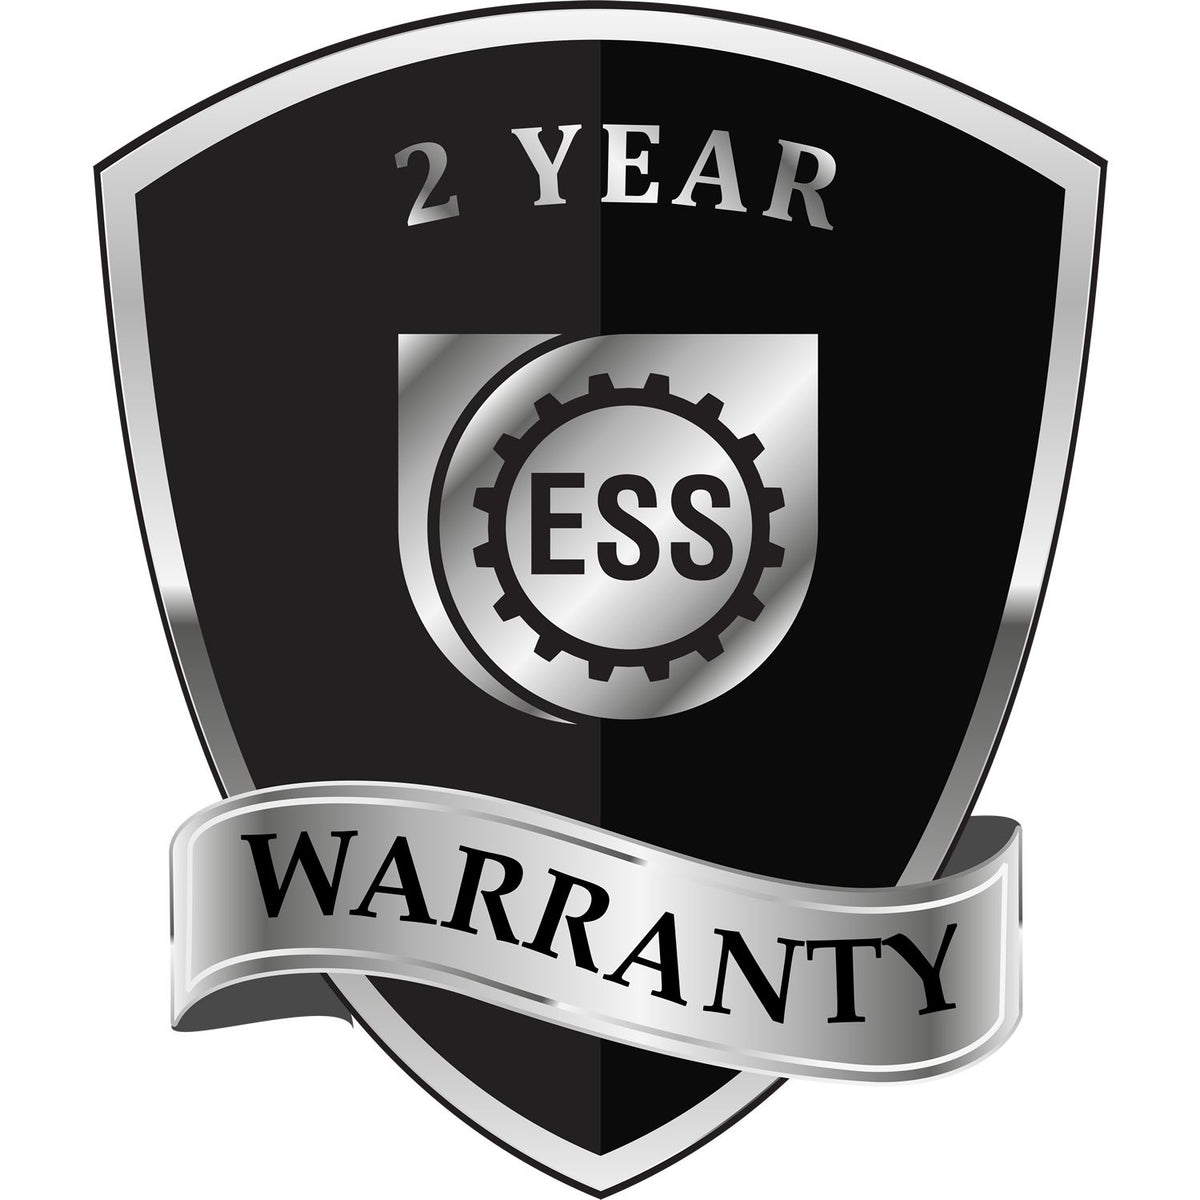 A black and silver badge or emblem showing warranty information for the Hybrid Iowa Landscape Architect Seal